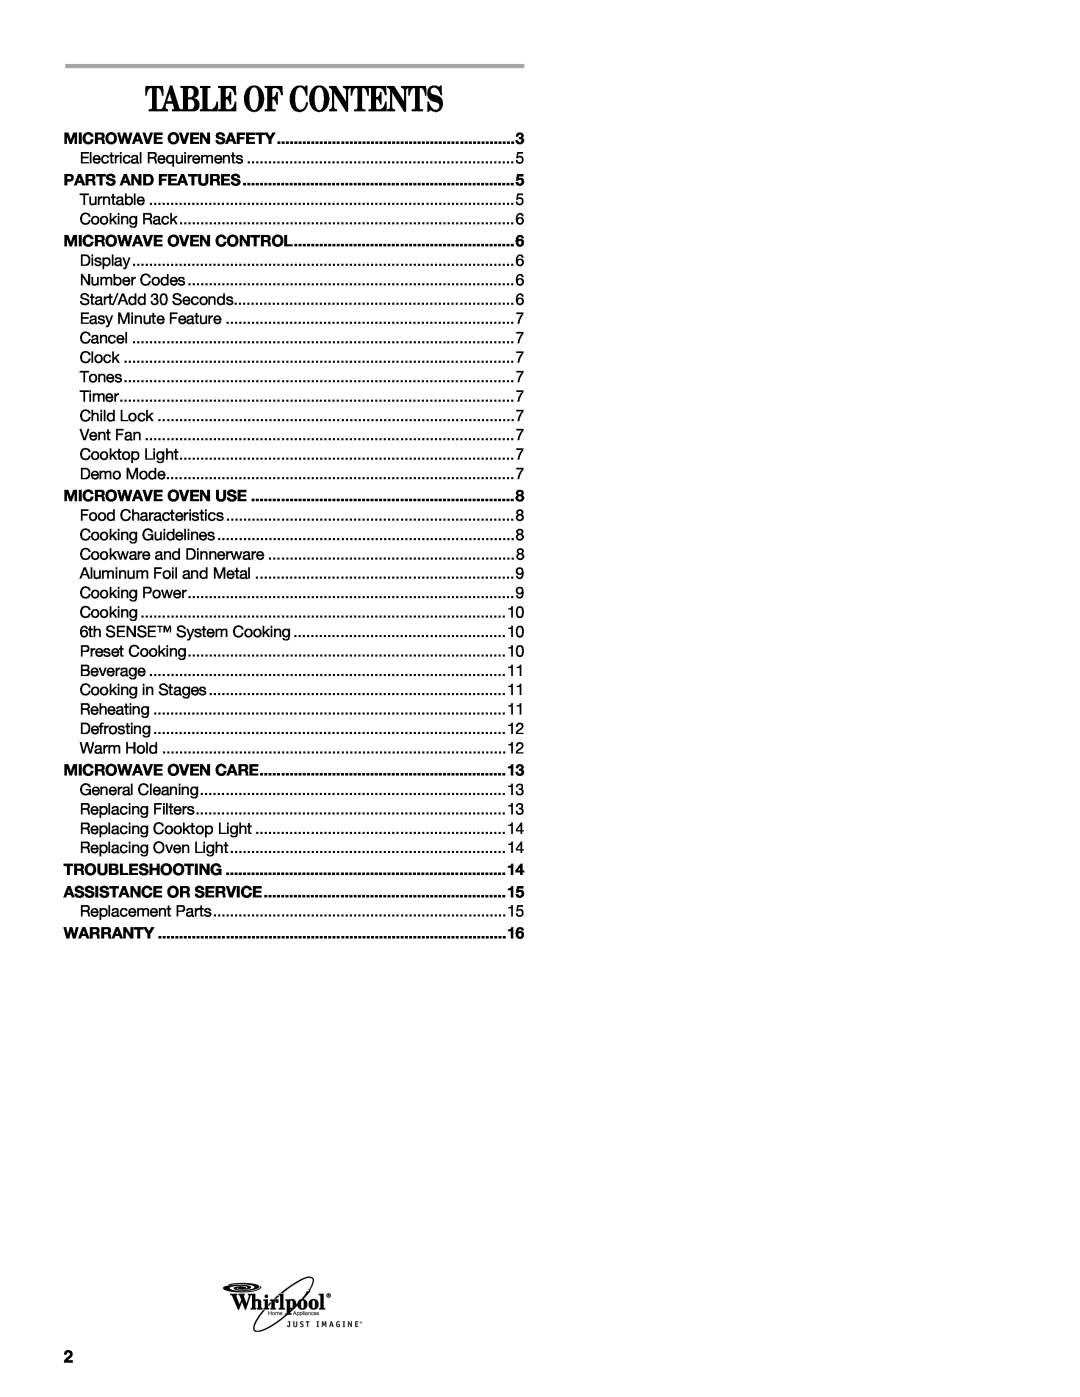 Whirlpool MH3184XPS manual Table Of Contents 